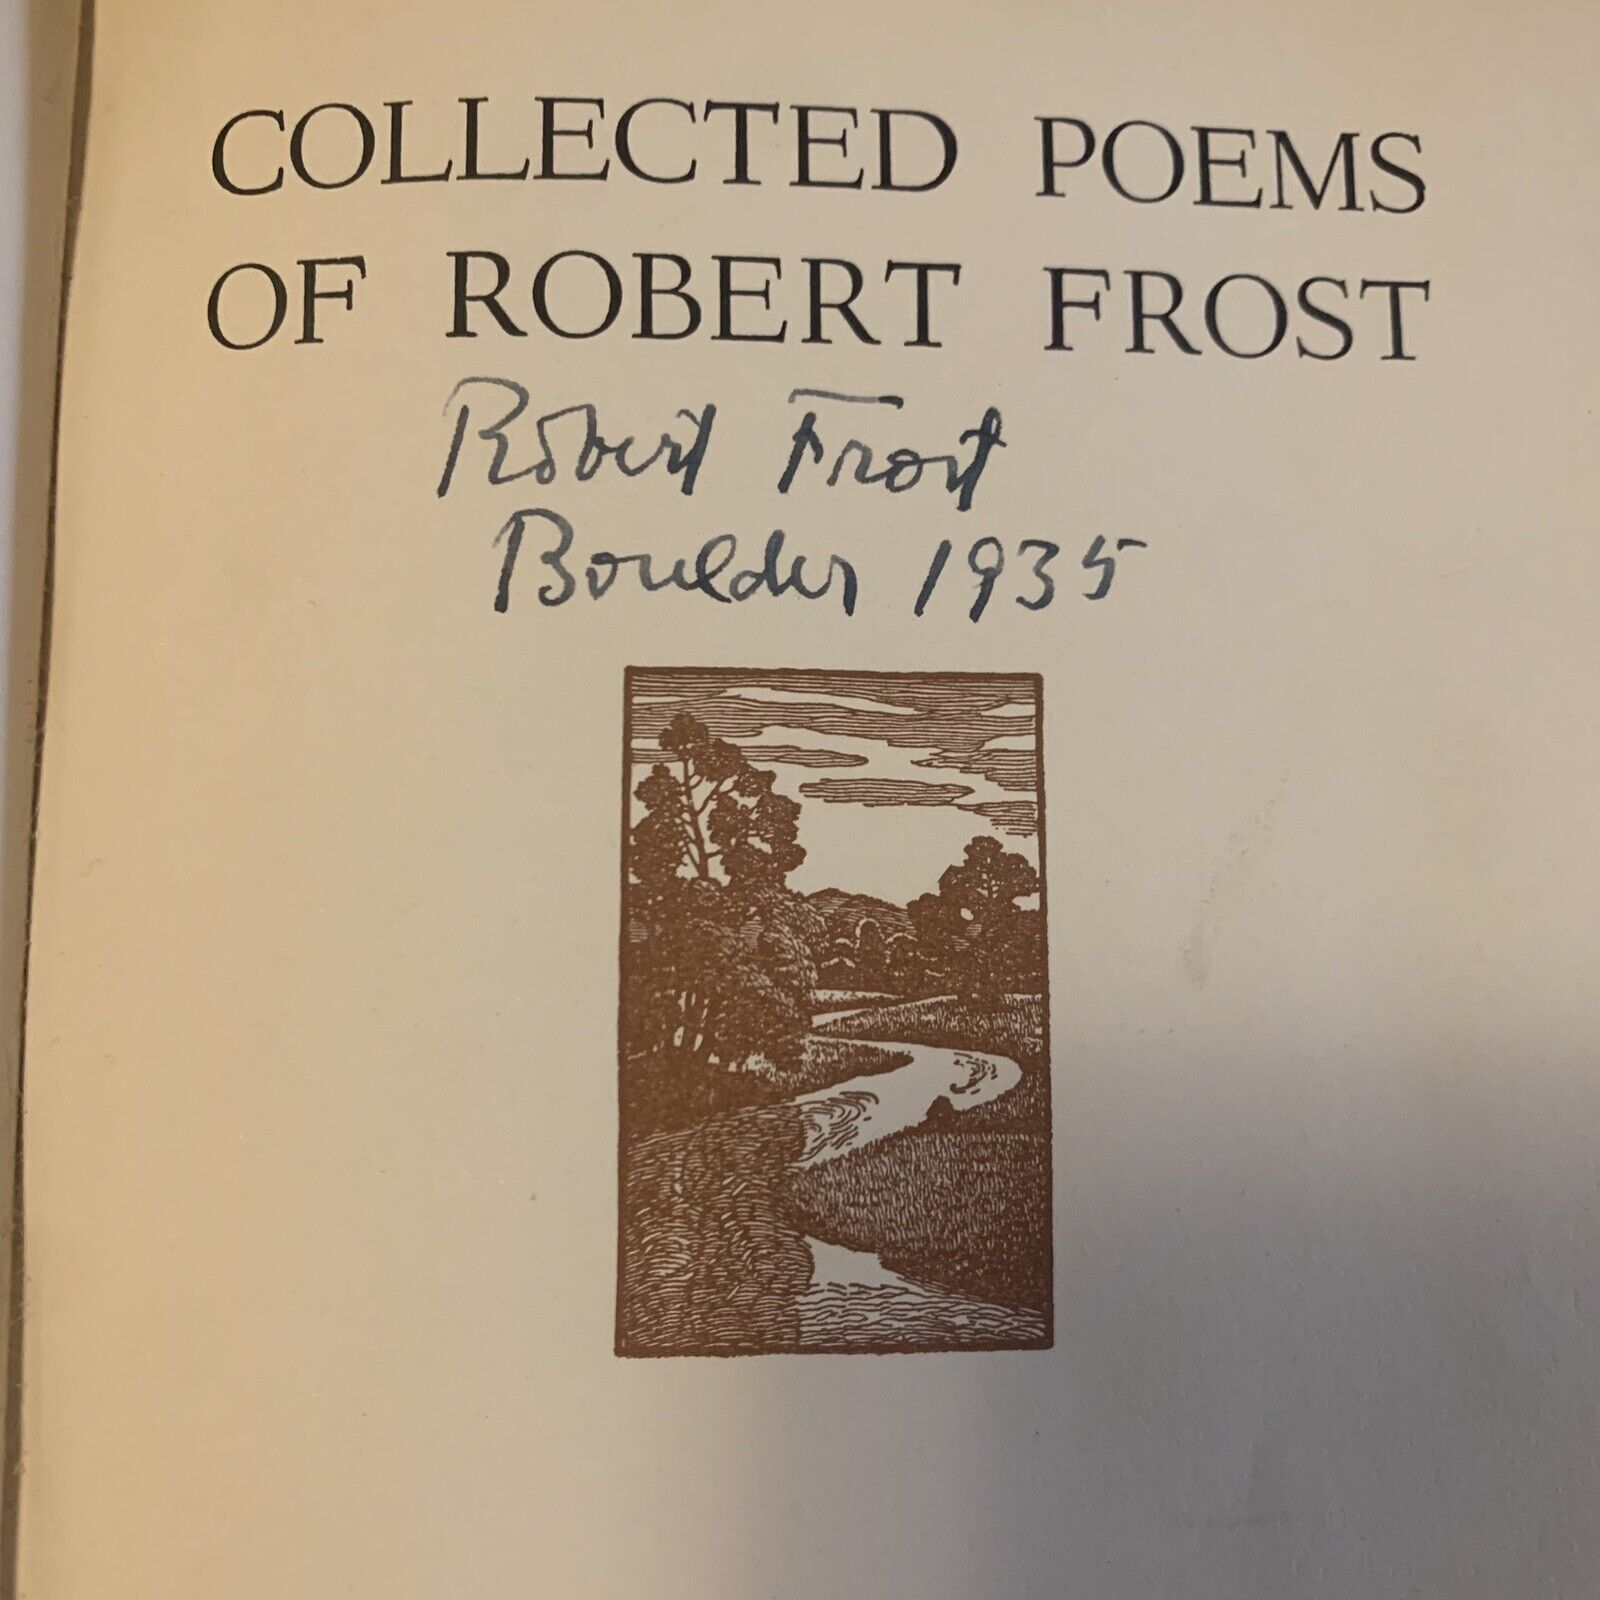 Collected Poems of Robert Frost - Signed “Robert Frost - Boulder 1935” HC 1930